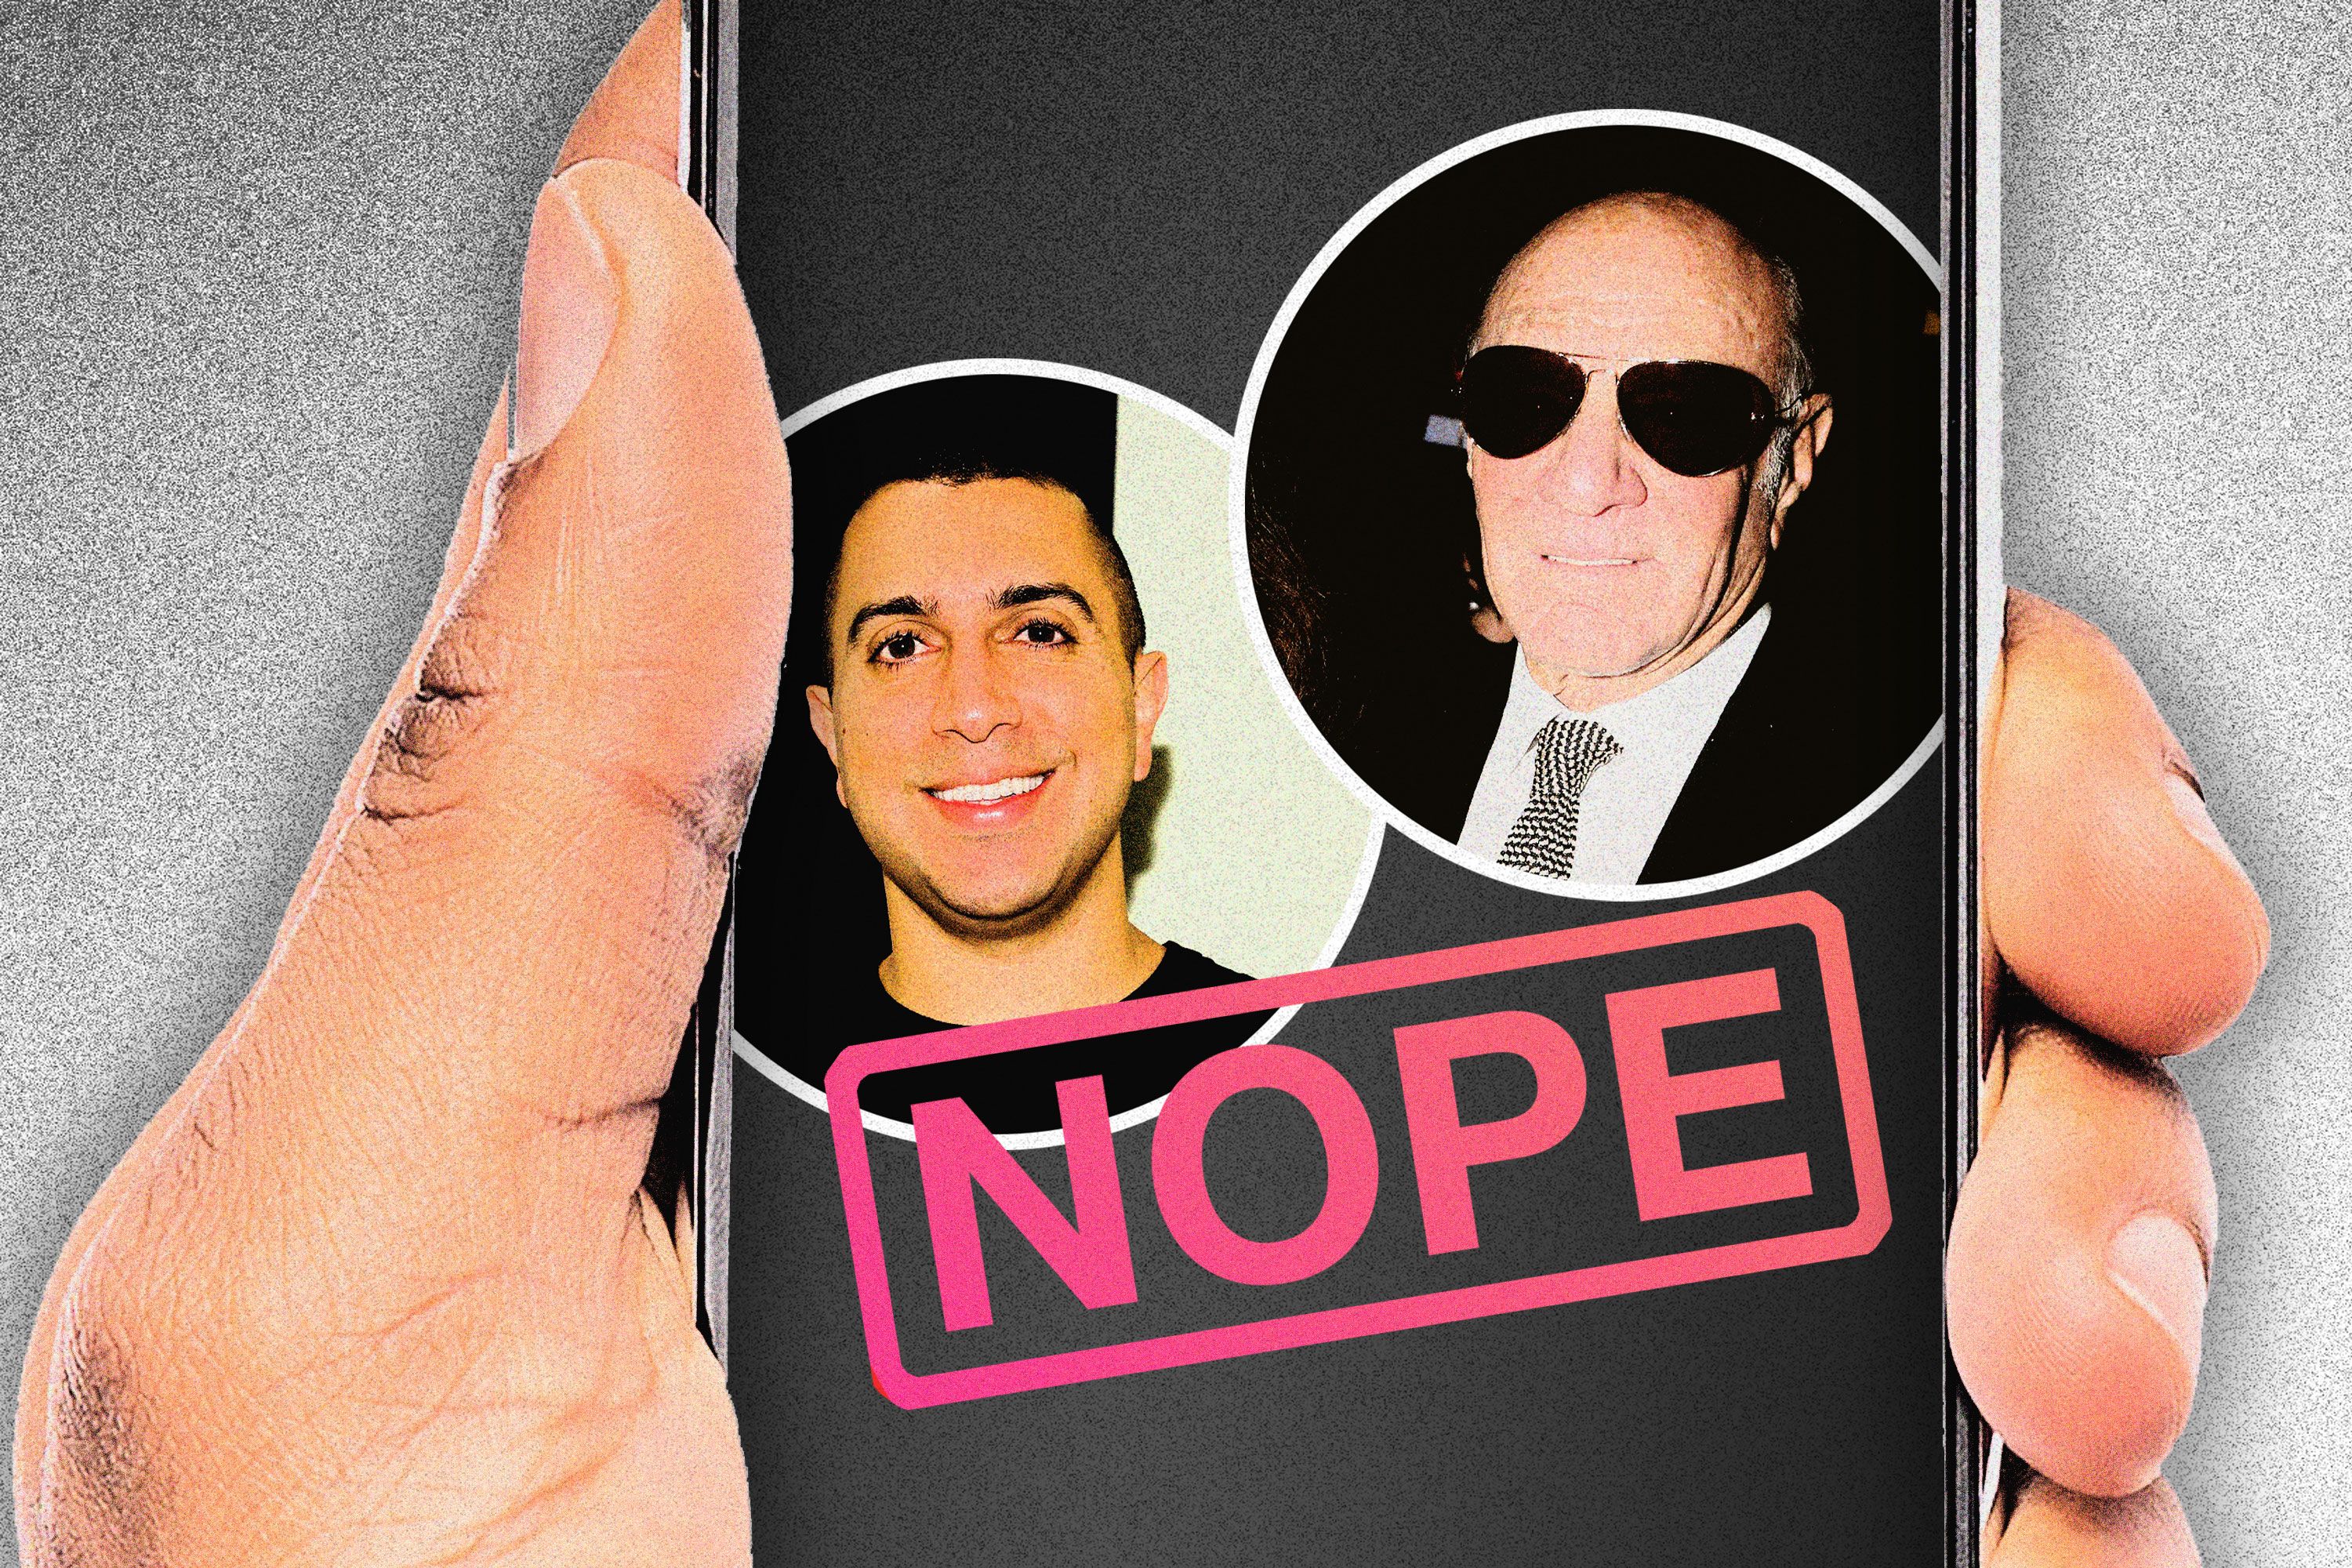 The Tinder Revenge Story Between Sean Rad and Barry Diller pic